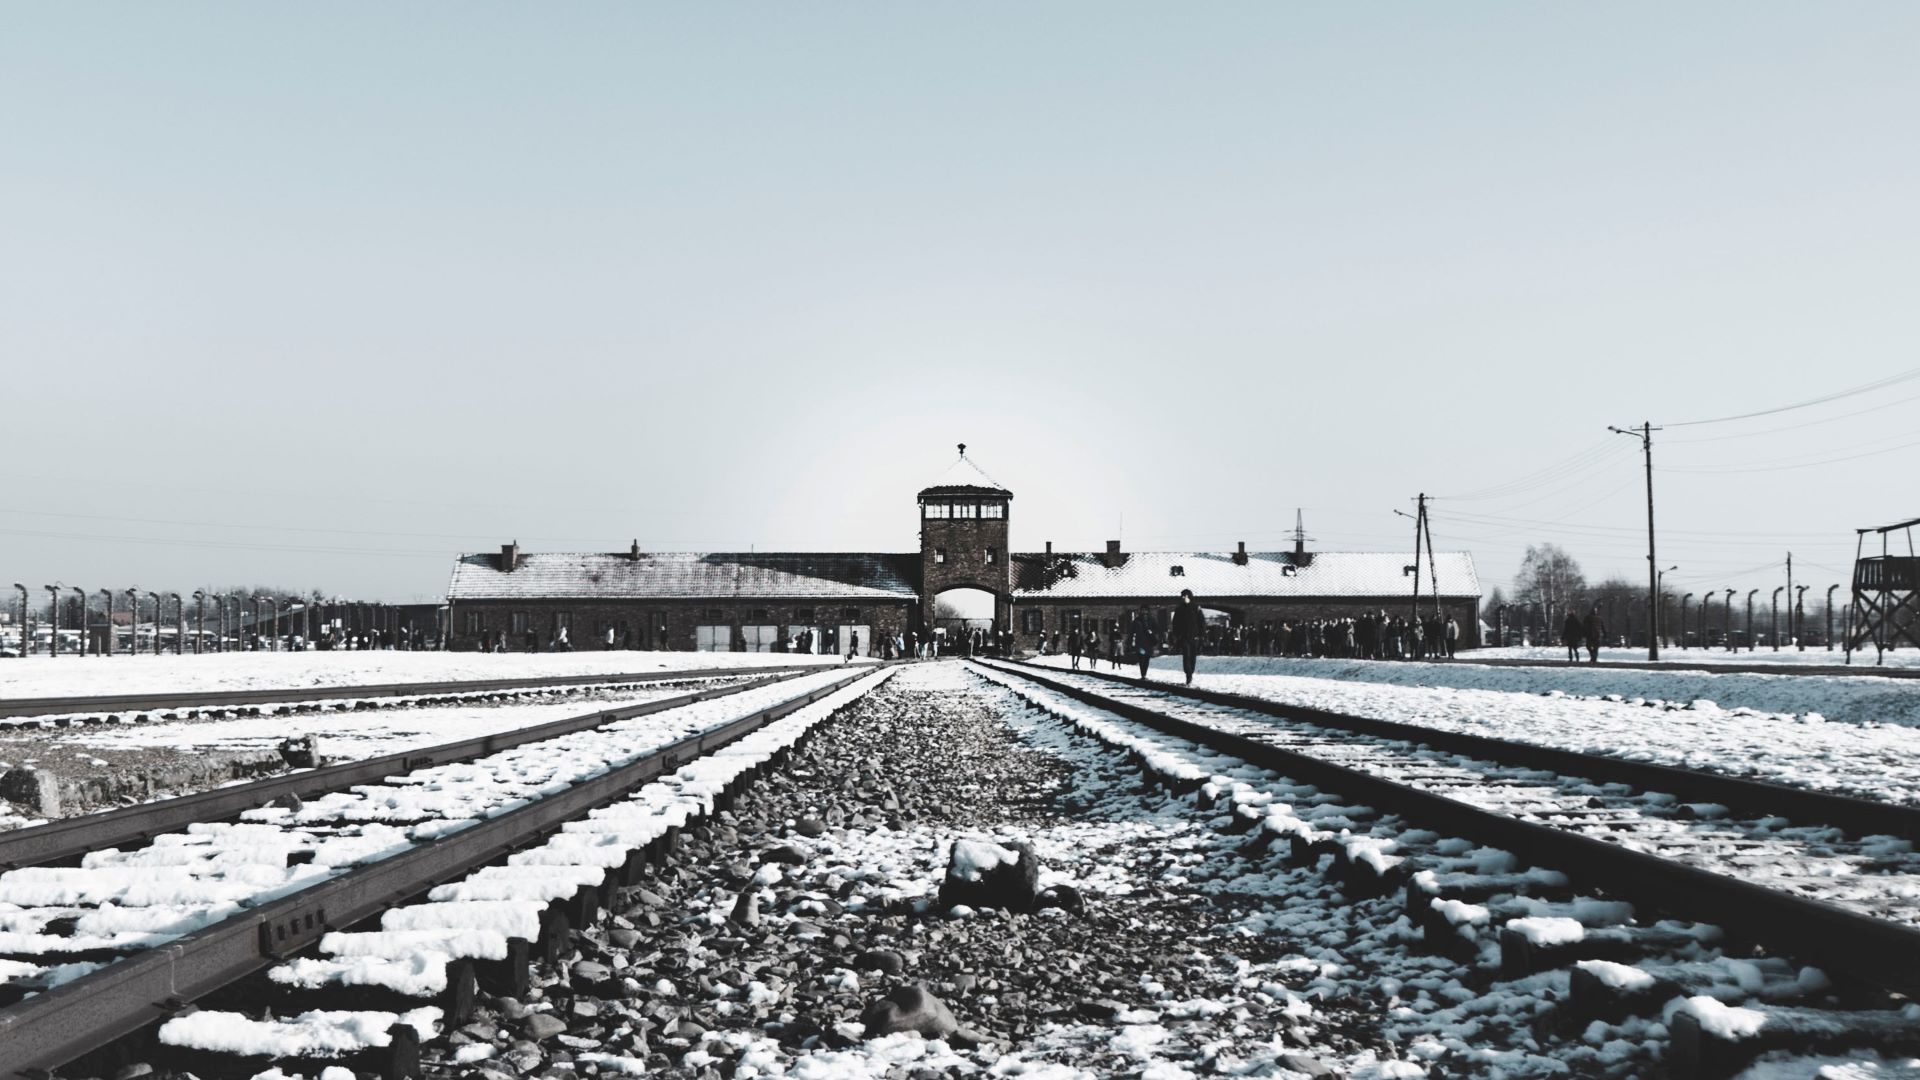 A picture of the gates to the Auschwitz-Birkenau concentration camp.